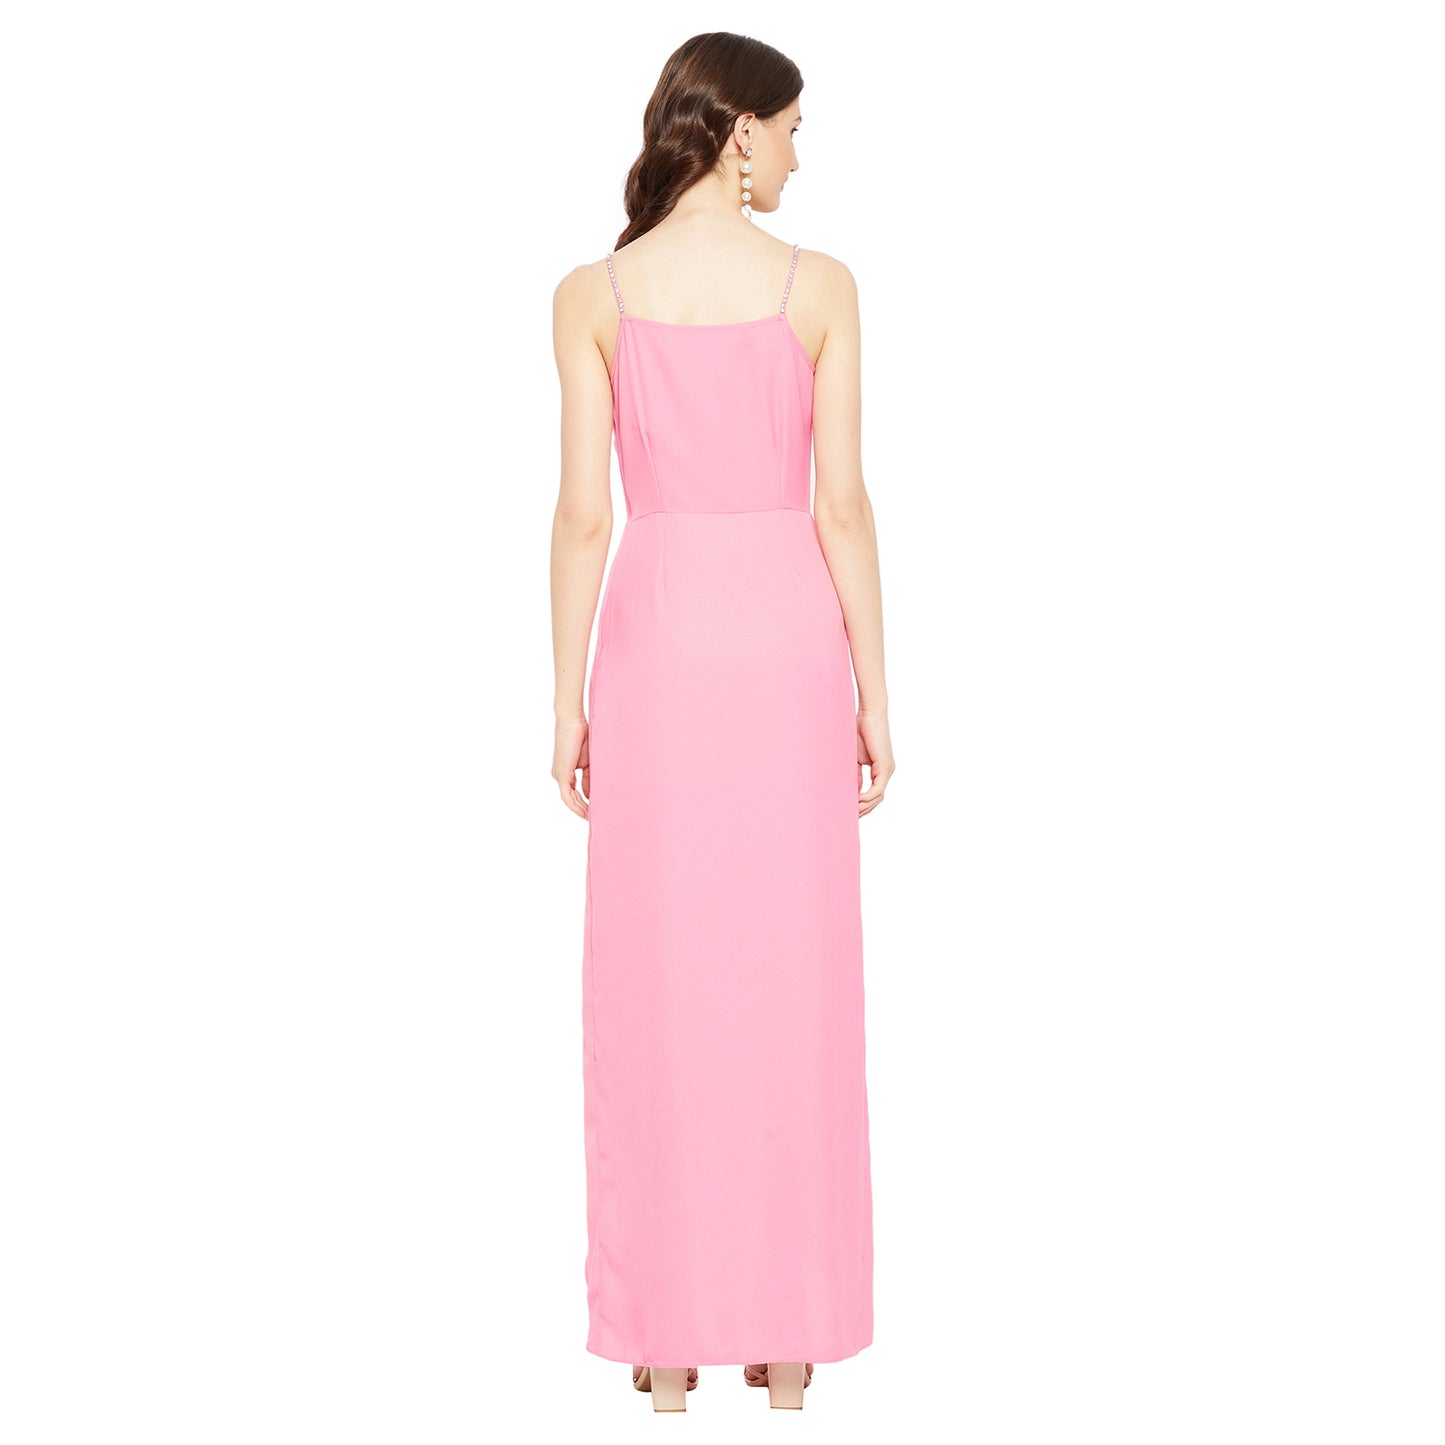 LY2 Pink Overlap Dress With Side Slit